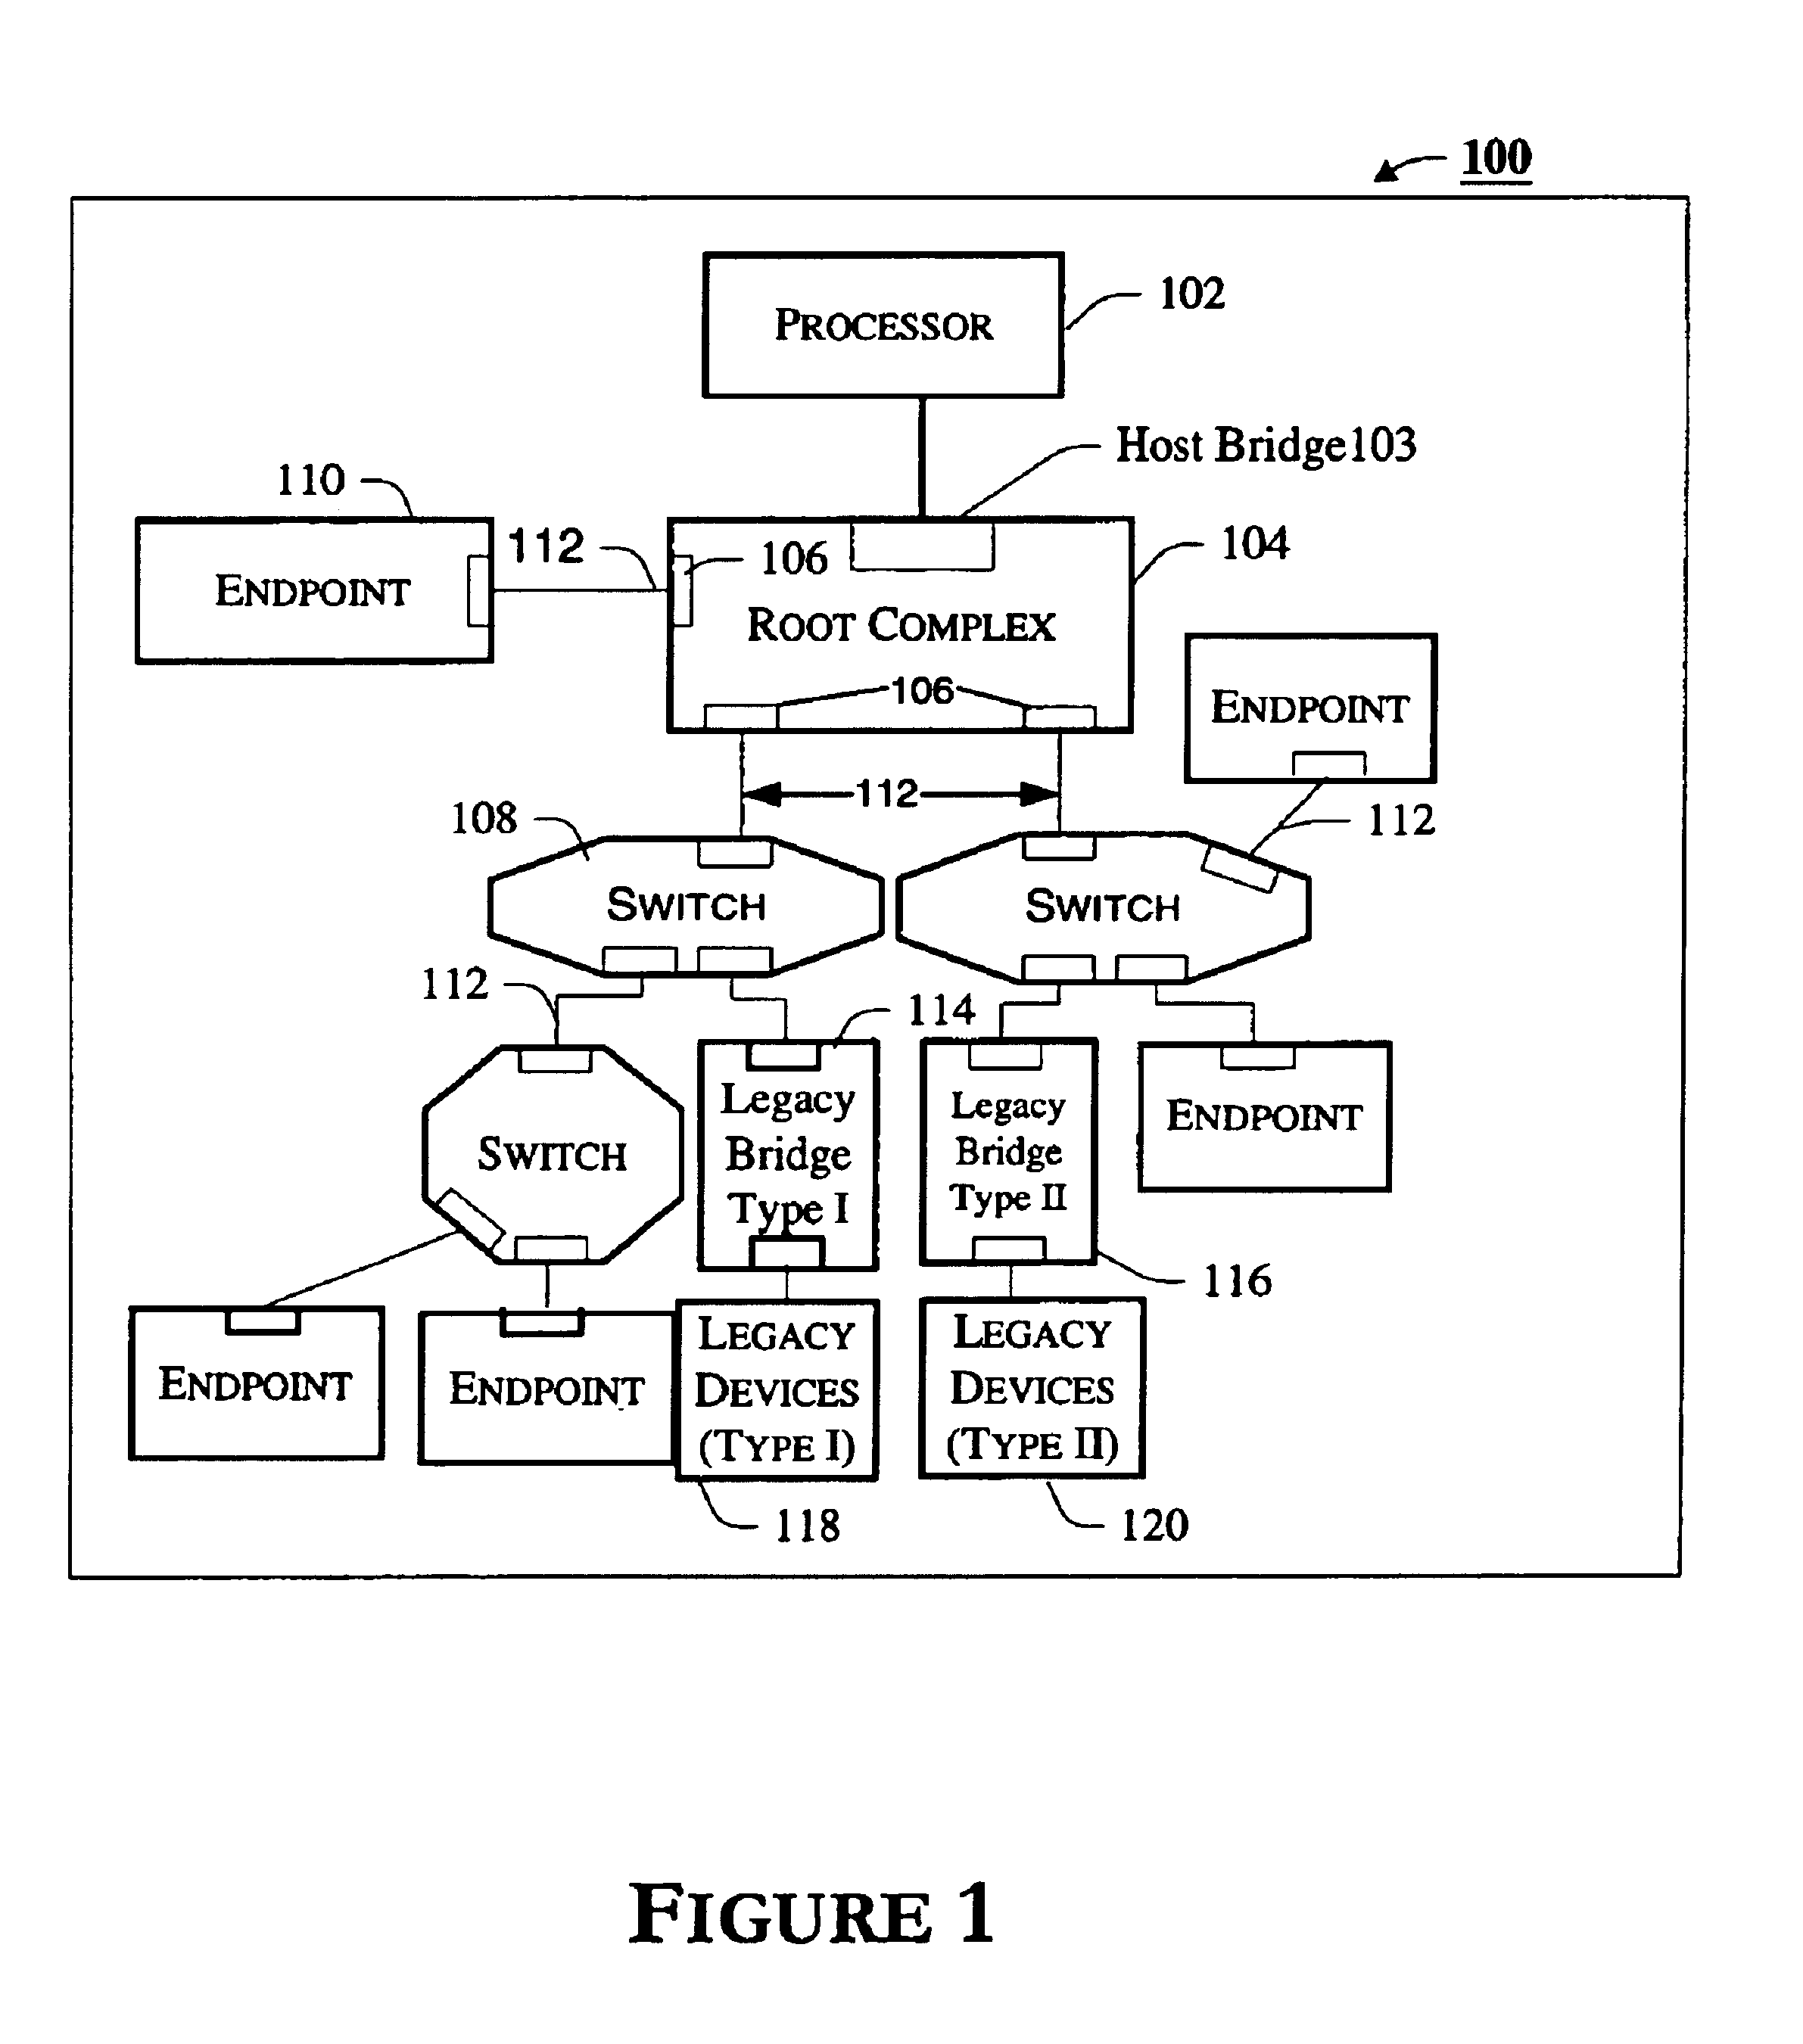 Communicating transaction types between agents in a computer system using packet headers including an extended type/extended length field